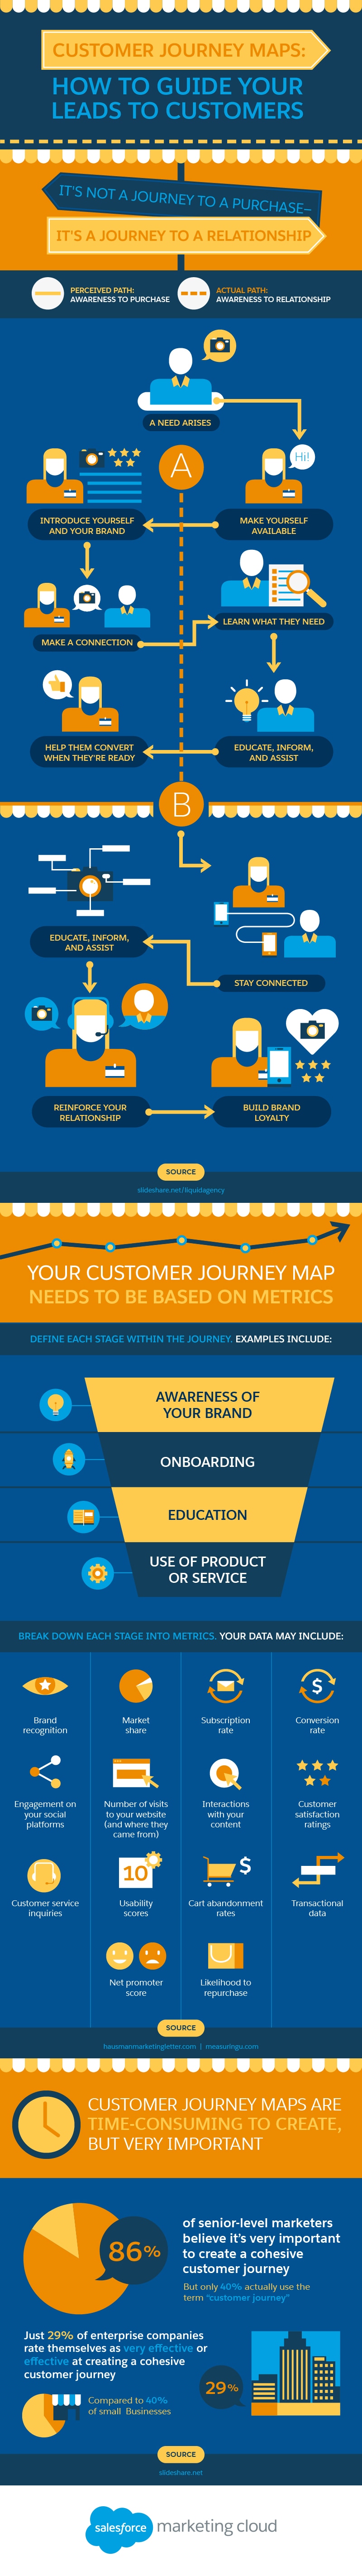 Customer Journey Maps: How to Guide Your Leads to Customers